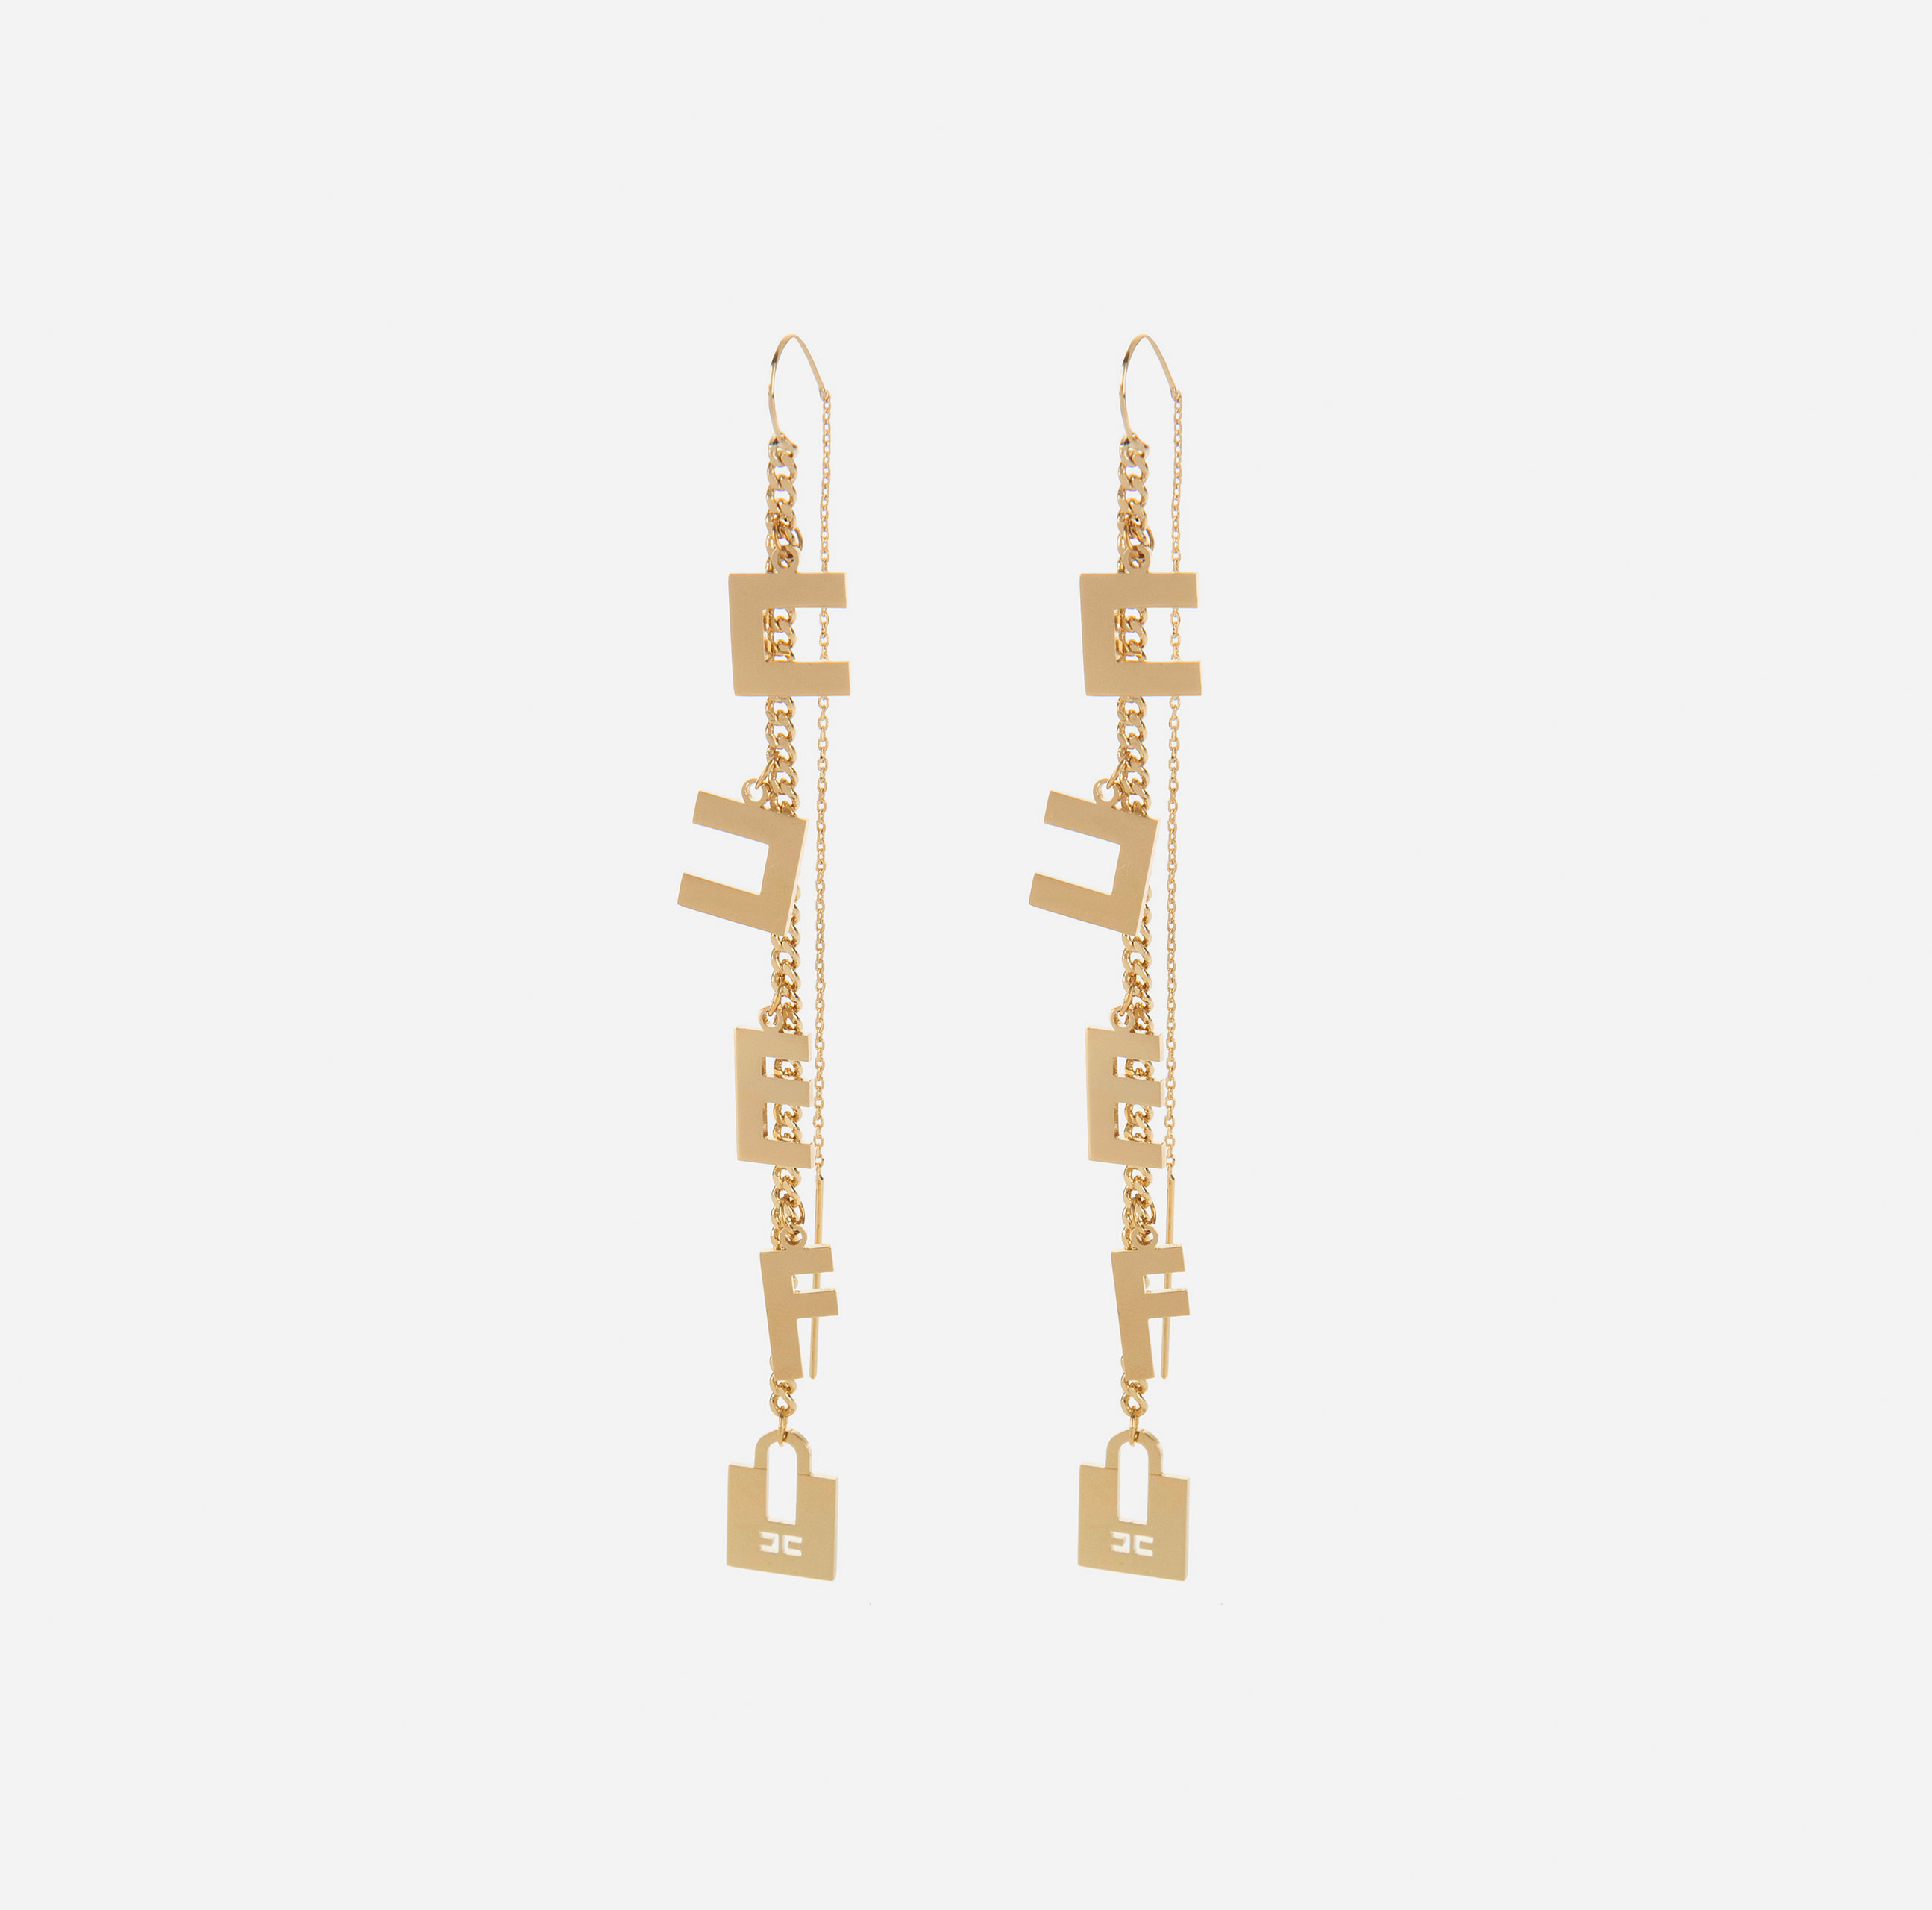 Earrings with charms - ACCESSORI - Elisabetta Franchi